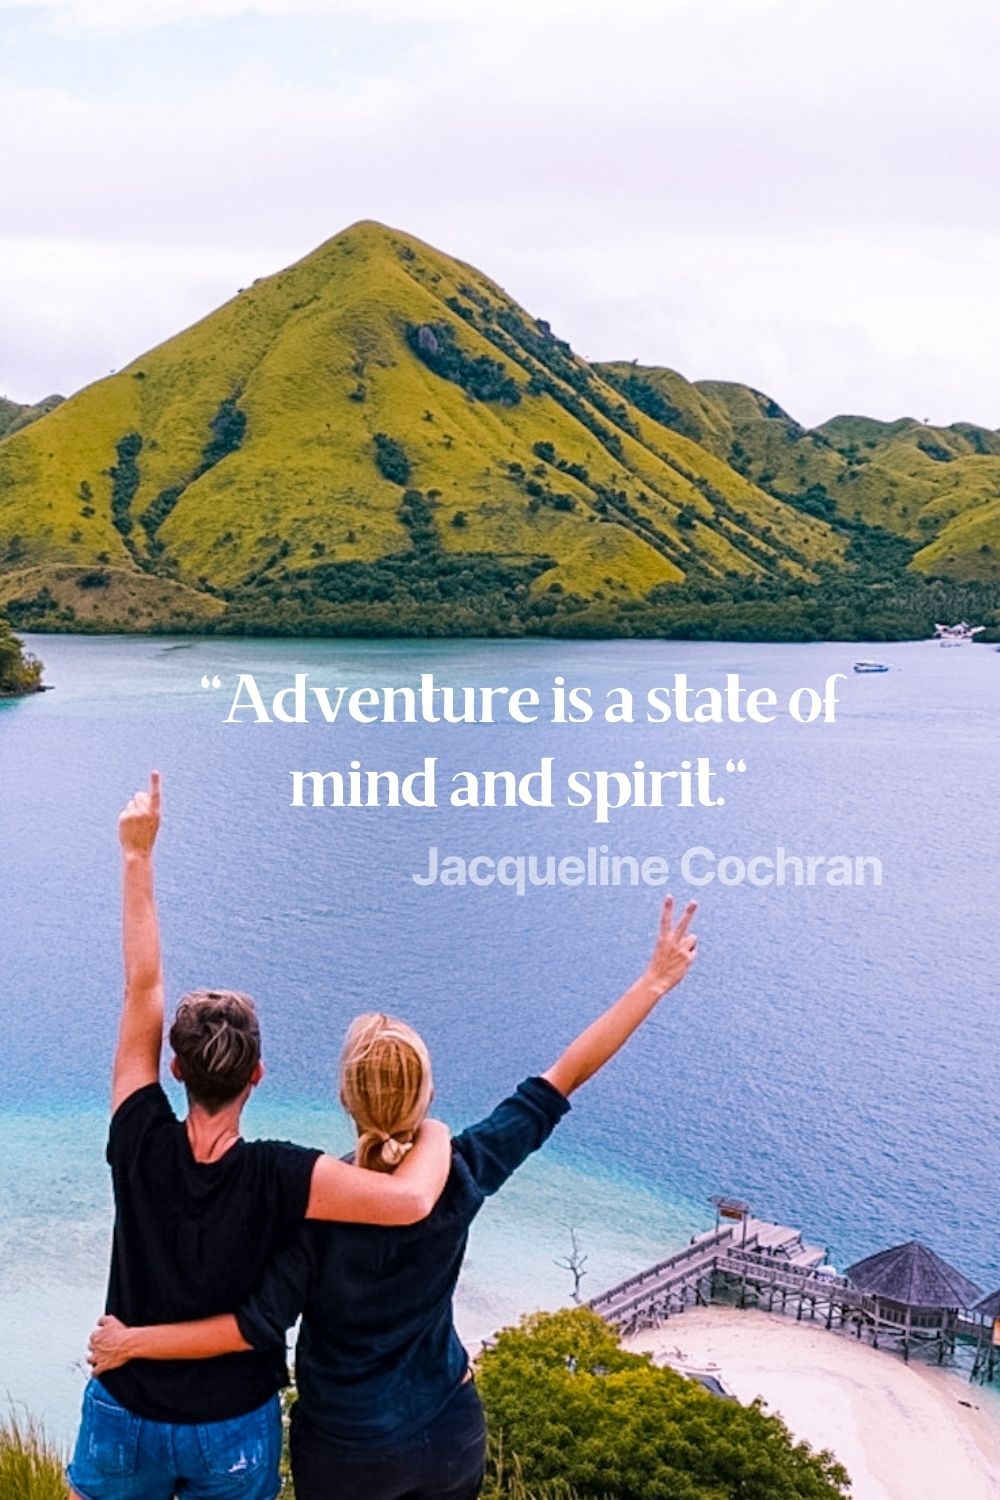 Adventure is state of mind quote on travel